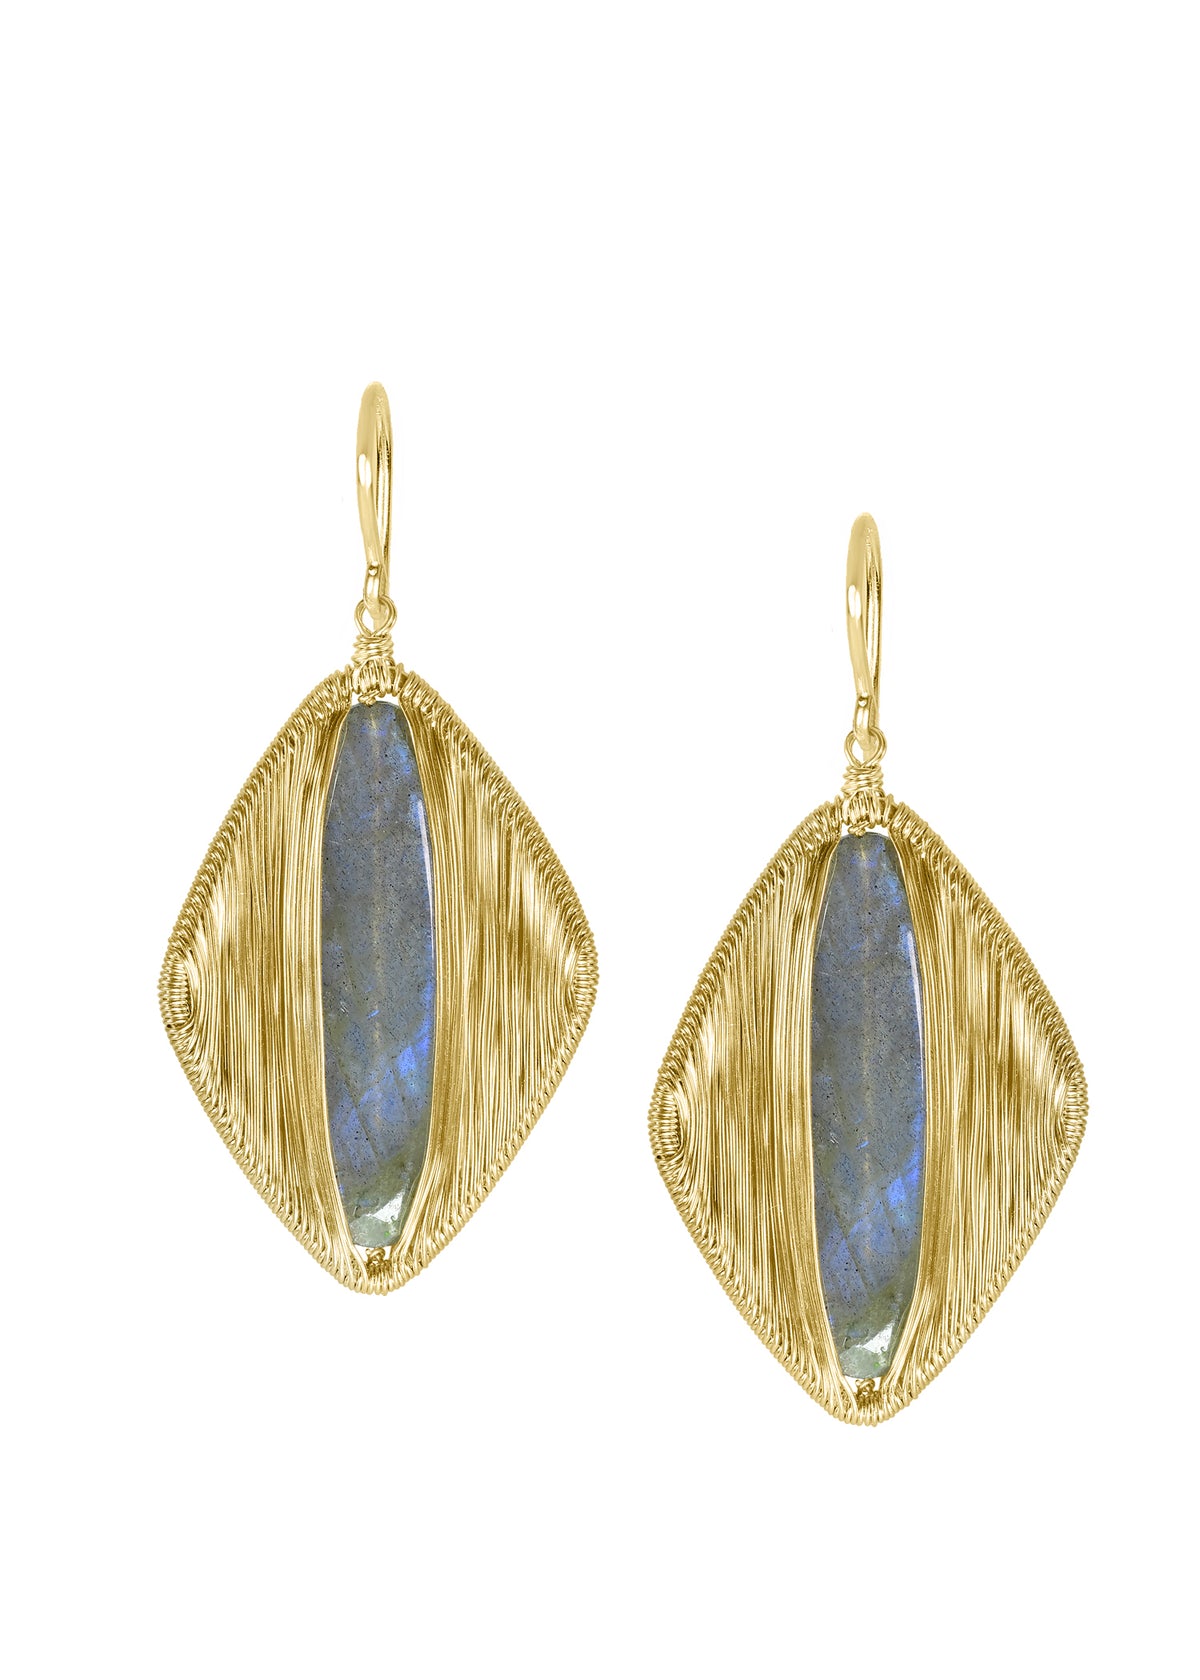 Labradorite 14k gold fill Earrings measure 1-11/16&quot; in length (including the ear wires) and 7/8&quot; in width at the widest point Handmade in our Los Angeles studio